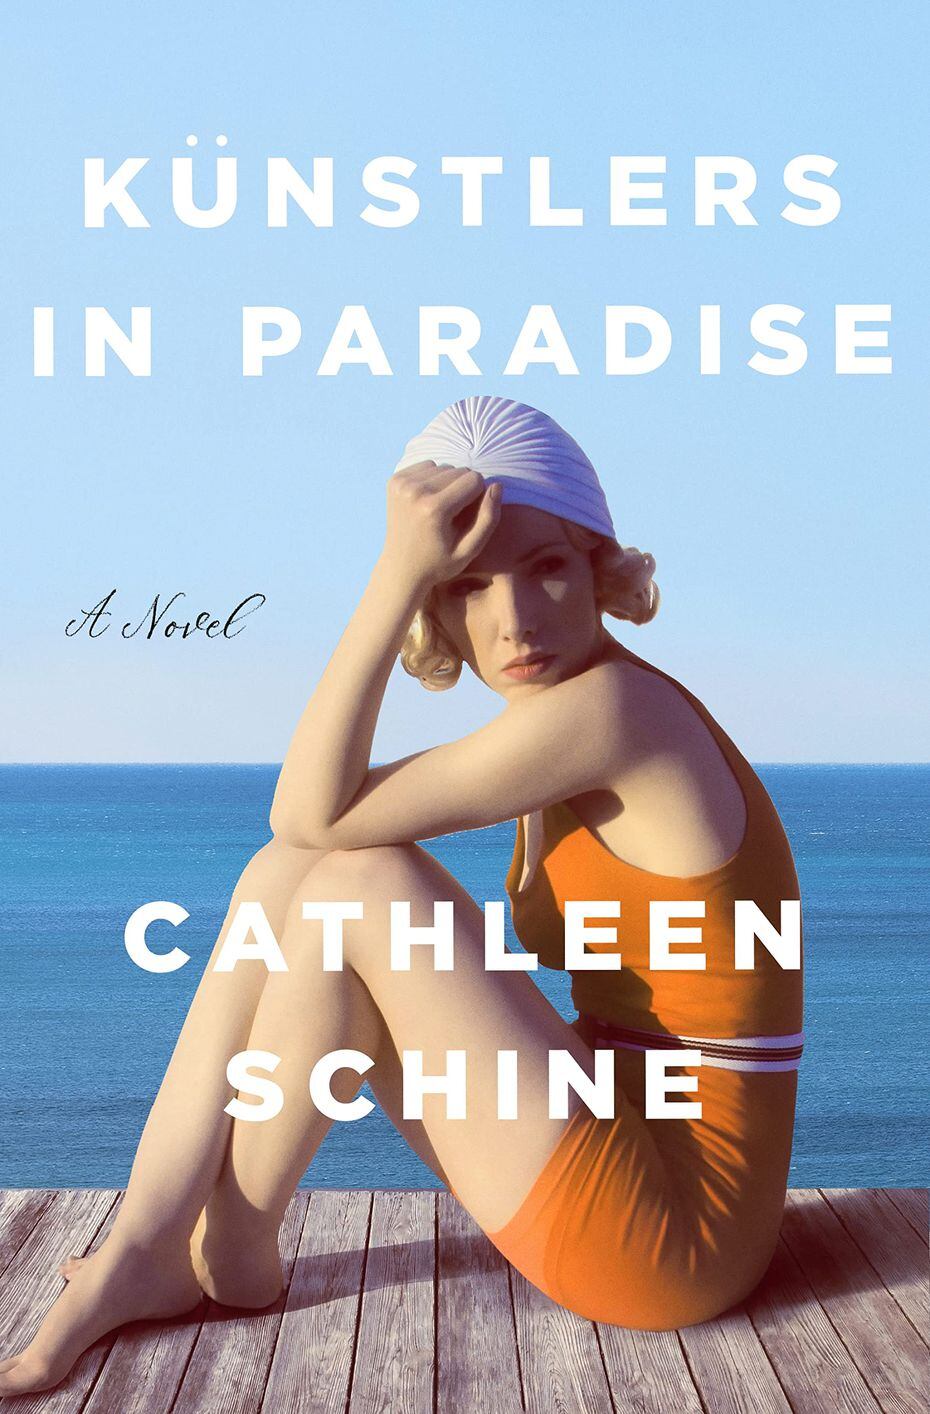 "Künstlers in Paradise" by Cathleen Schine is about a 20-something man who moves in with his...